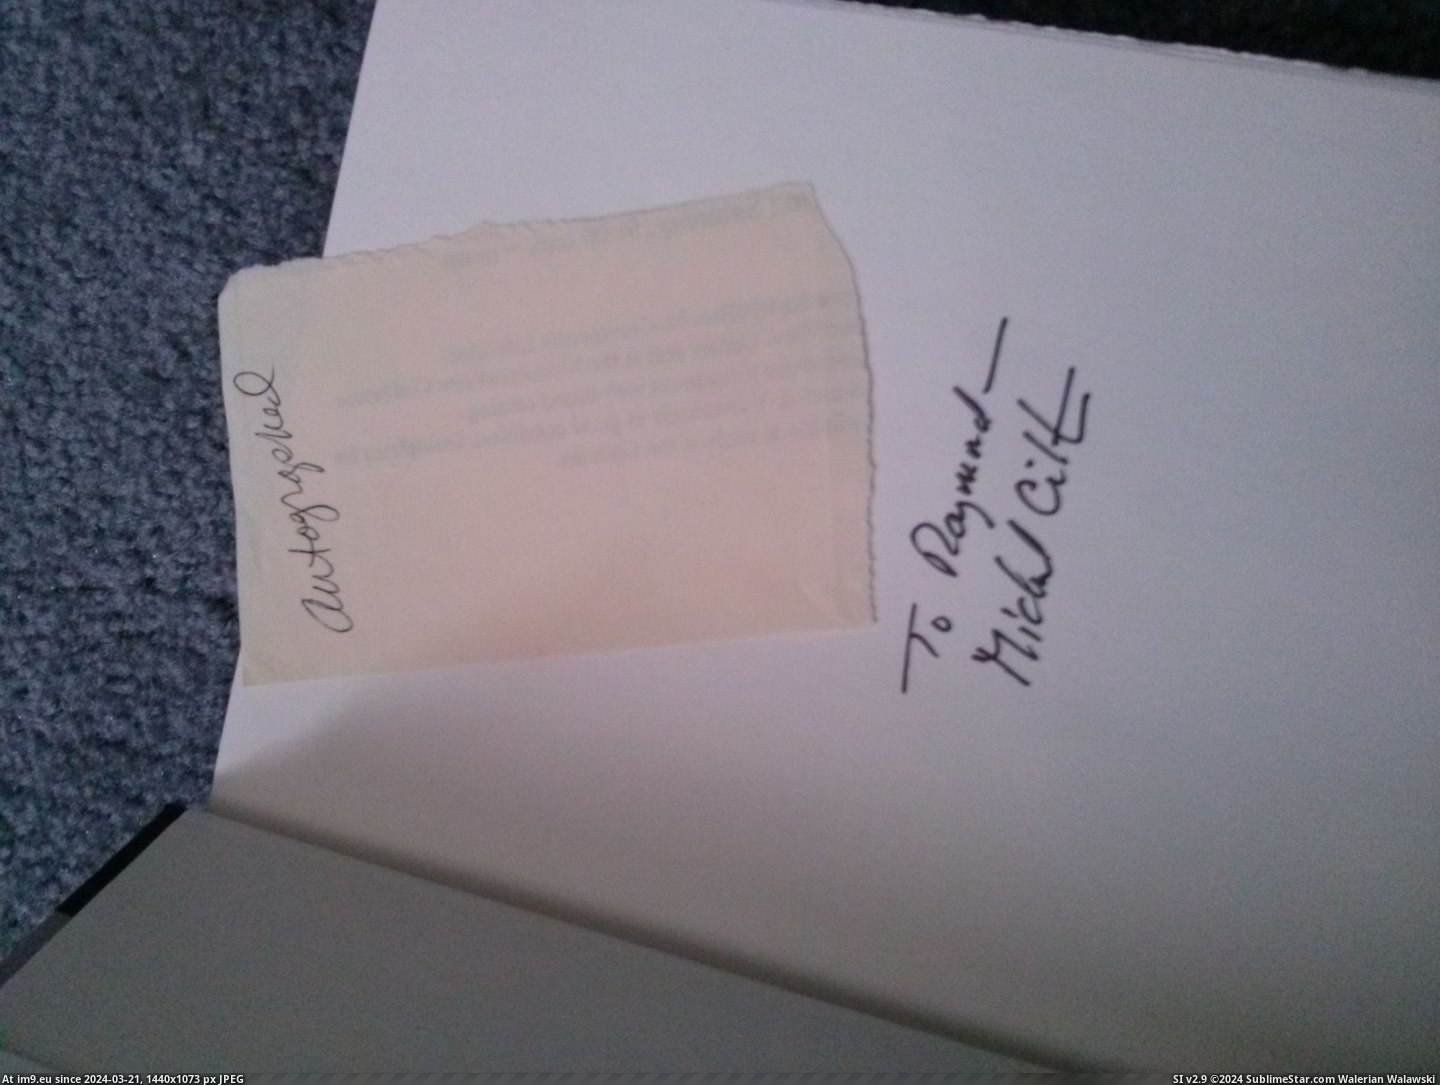 #For #Was #Pretty #Goodwill #Prey #Autographed #Crichton #Cool #Picked #Michael [Mildlyinteresting] Picked up 'Prey' by Michael Crichton at a Goodwill today for $2.99, and it was autographed. Pretty cool. Pic. (Изображение из альбом My r/MILDLYINTERESTING favs))